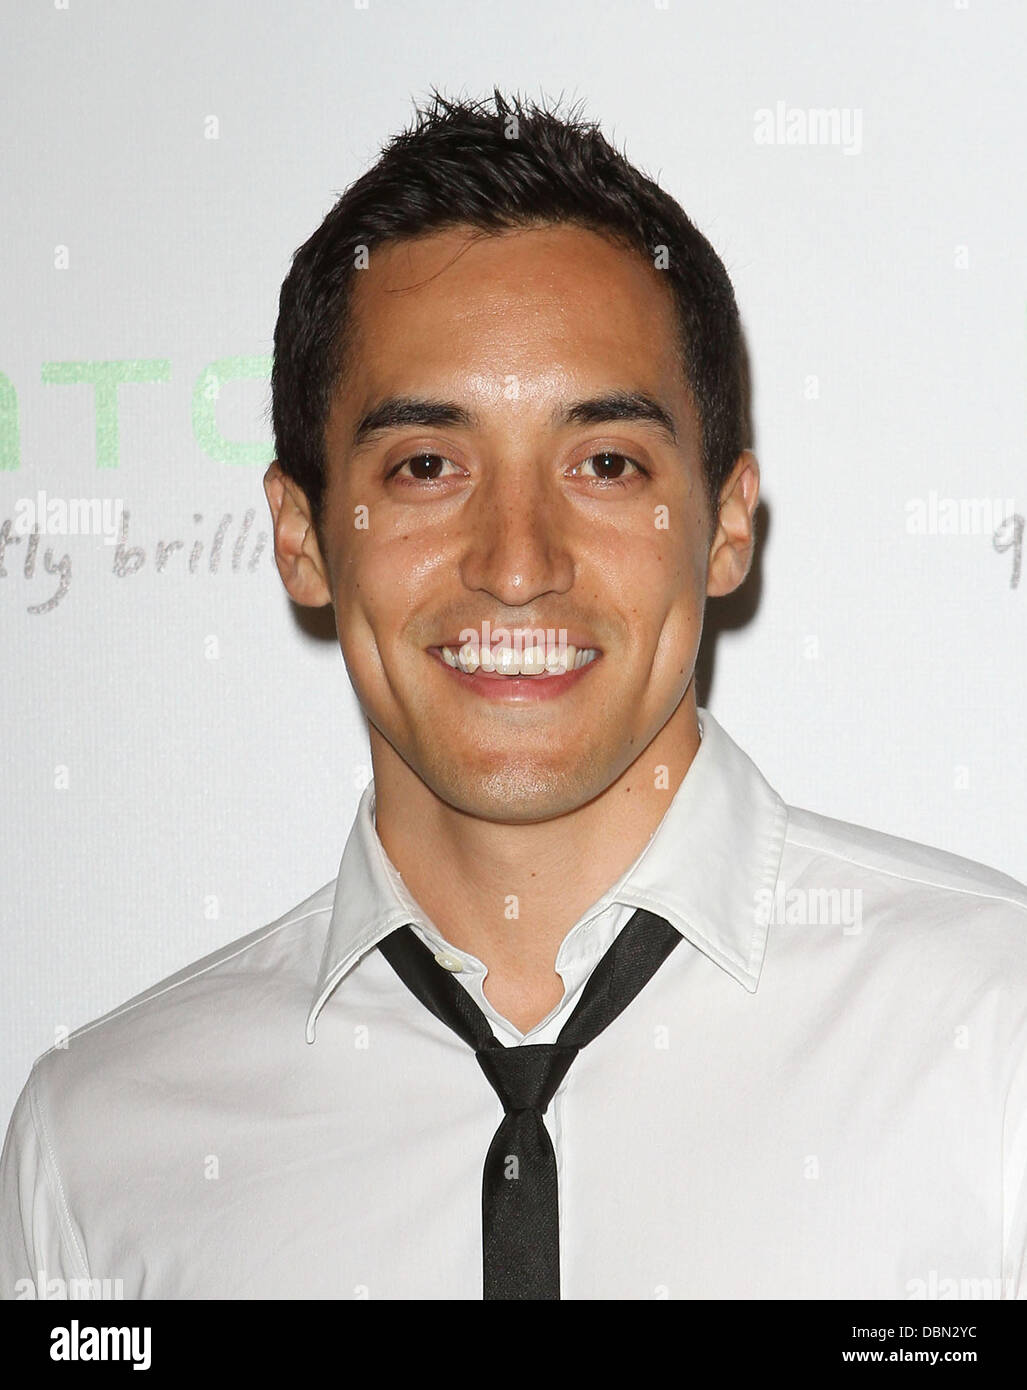 Keahu Kahuanui The HTC Status Social launch event held at Paramount Studios - Arrivals Los Angeles, California - 19.07.11 Stock Photo